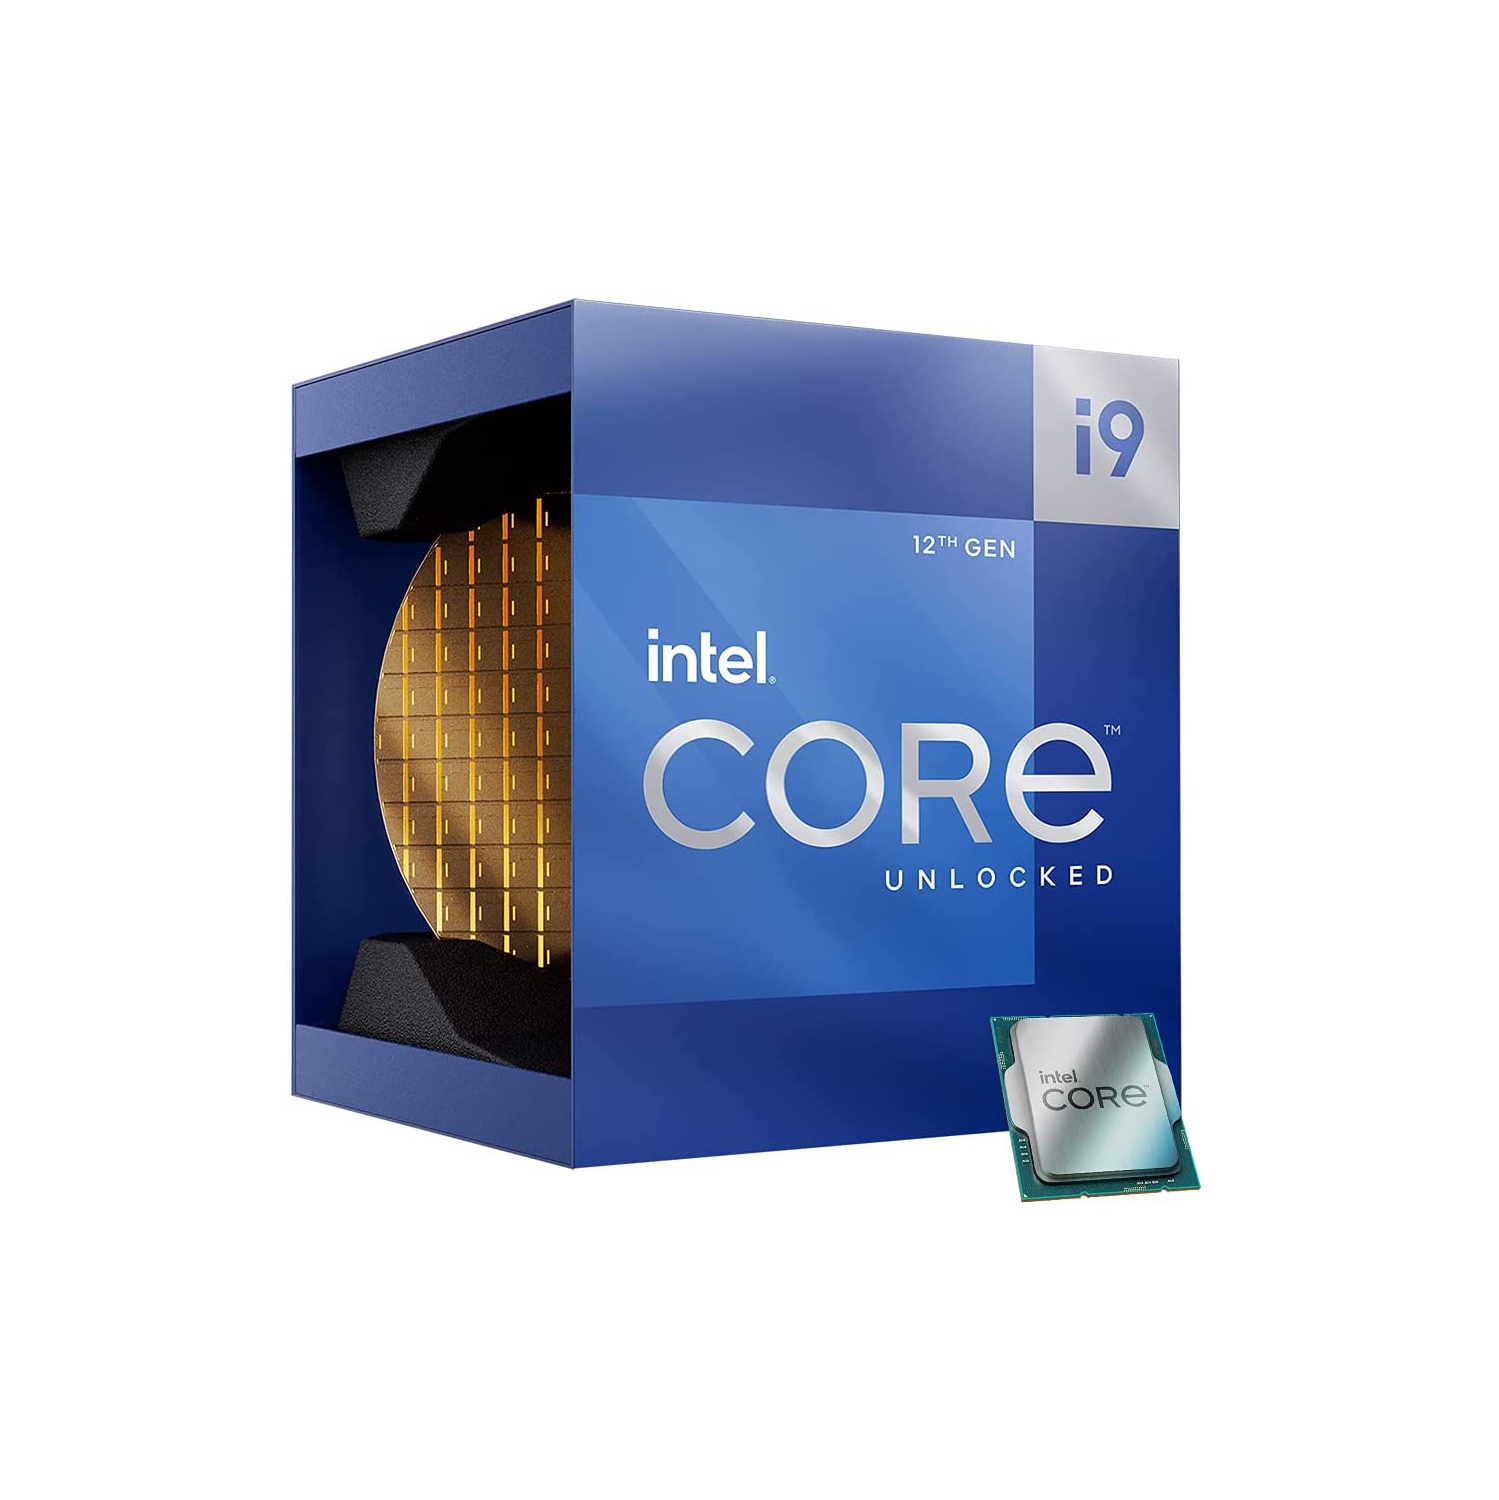 Intel Core i9-12900K Desktop Processor 16 (8P+8E) Cores up to 5.2 GHz Unlocked LGA1700 (Require 600 Series Chipset MB) w/ Arctic MX-2 Thermal Compound